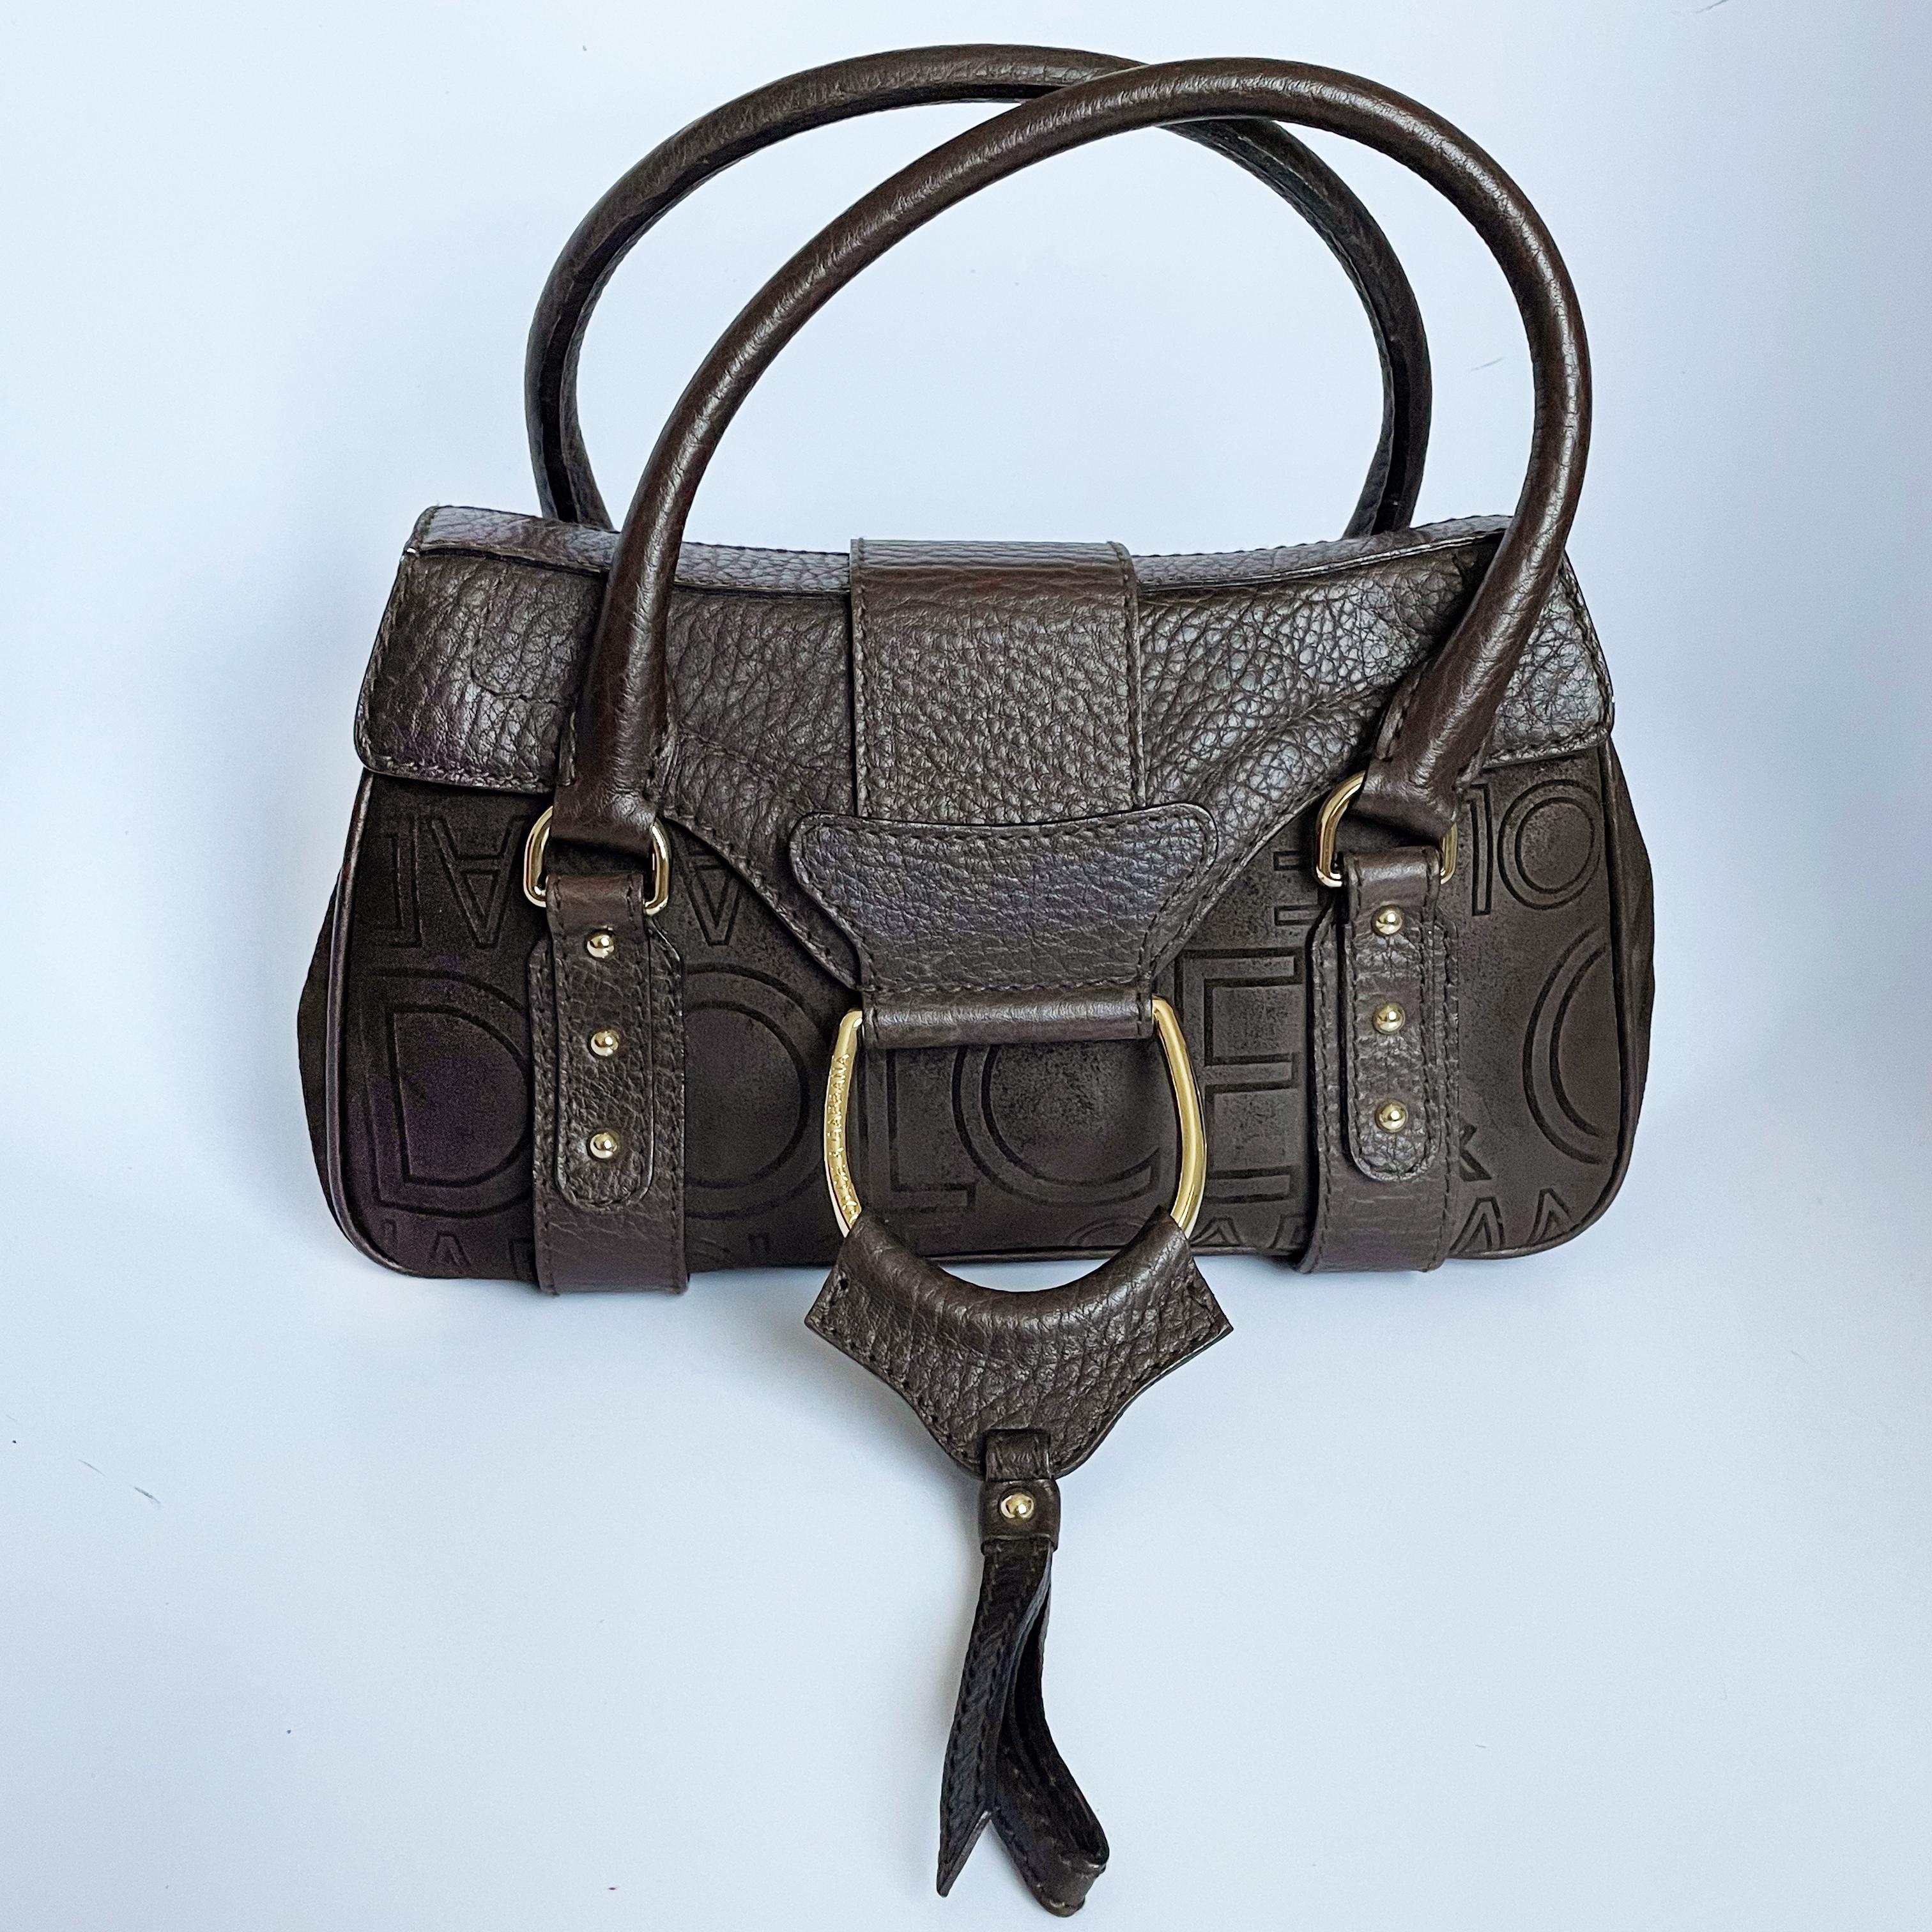 Authentic, preowned Dolce & Gabbana brown D-ring flap bag, likely from the 2000s. 

Made from sueded leather with pebbled leather trim, it features abstract Dolce & Gabbana logos throughout. Fastens with hidden magnet under flap and lined in logo